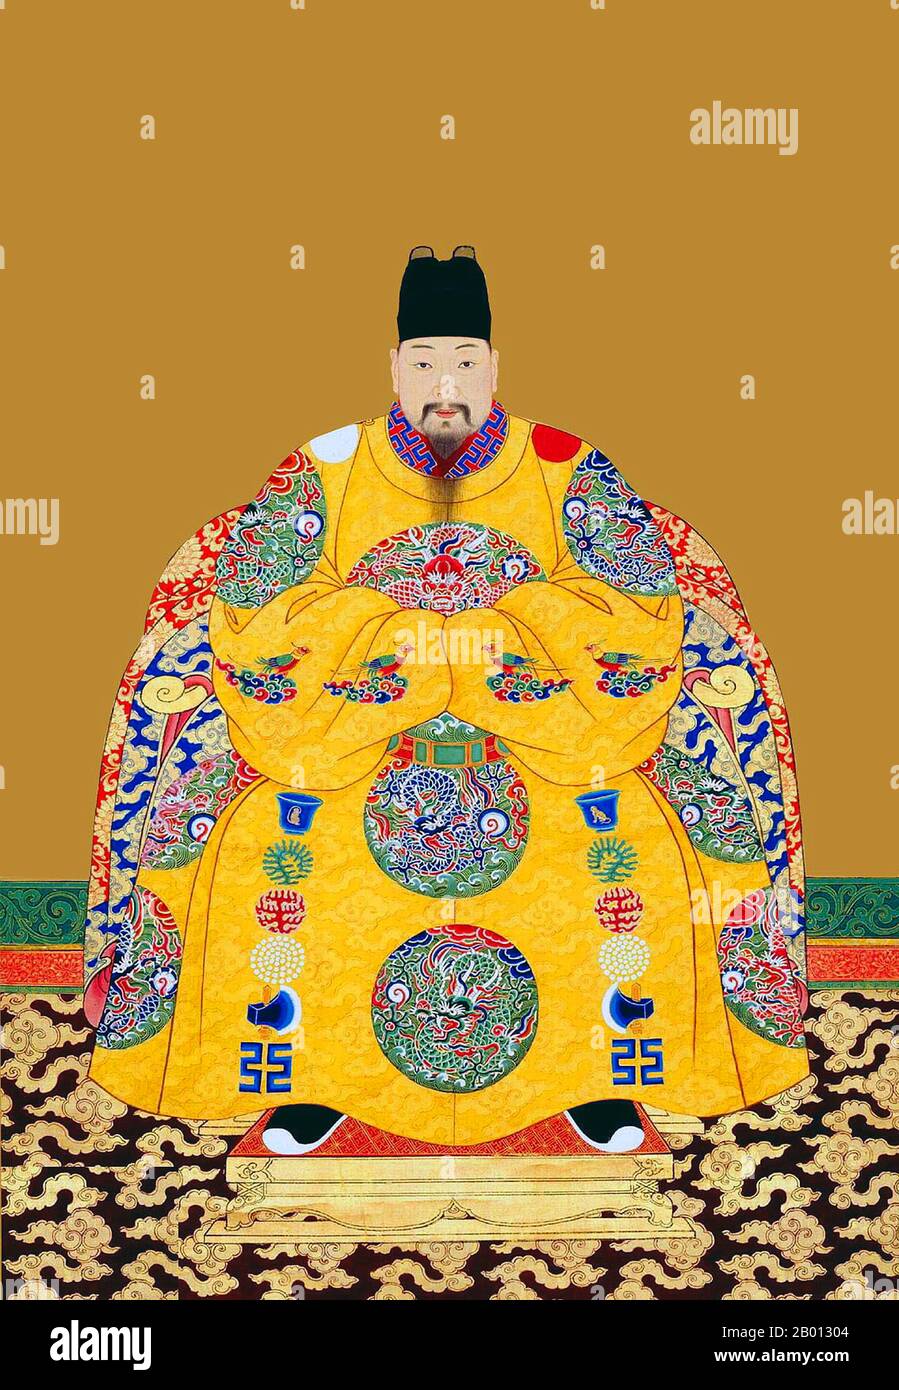 China: Emperor Jingtai (21 September 1428 - 14 March 1457), 7th ruler of the Ming Dynasty (r. 1449-1457). Hanging scroll painting, 15th-17th century.  The Jingtai Emperor (1428-1457), personal name Zhu Qiyu and temple name Daizong, was the 7th Emperor of the Ming Dynasty. His era name means 'Exalted View'. During Jingtai's reign, aided by the prominent minister Yu Qian, he paid particular attention to matters affecting his country. He repaired the Grand Canal as well as the system of dykes along the Yellow River. As a result of his efforts, the economy prospered and the dynasty strengthened, Stock Photo